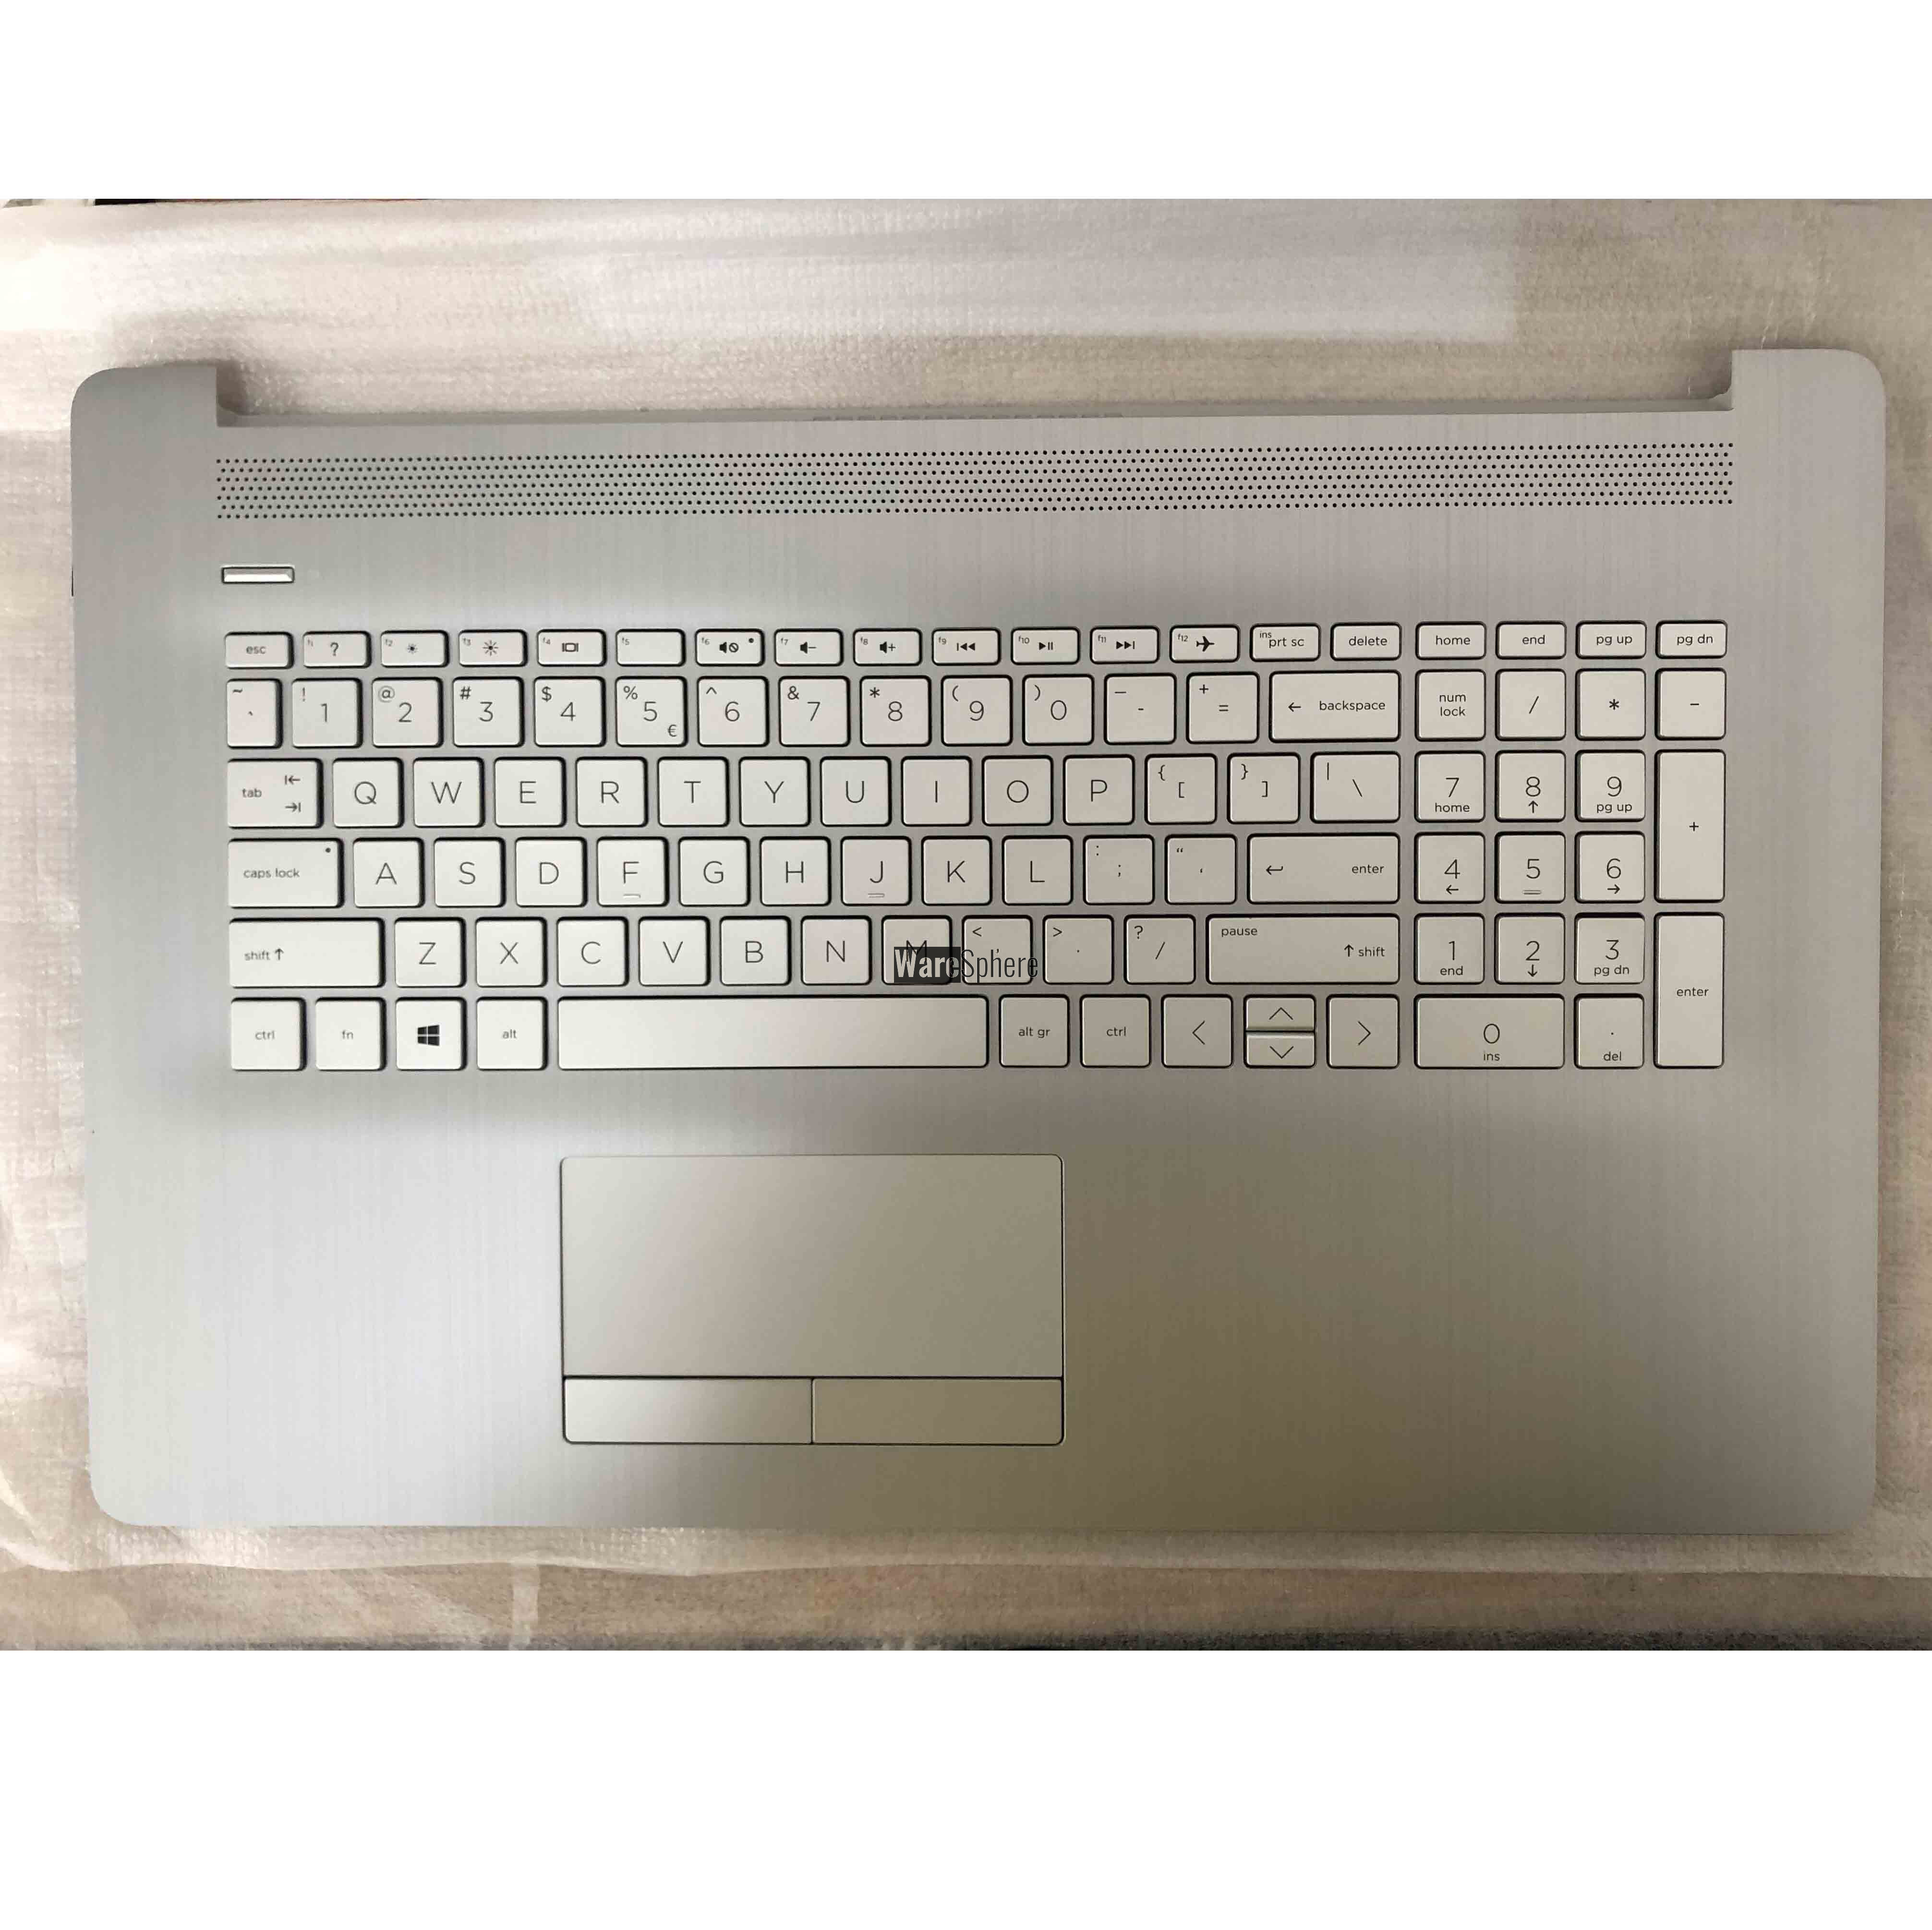 Top Cover Upper Case for HP 17-BY Palmrest With Nonbacklit Keyboard 6070B1308113 L92789-001 Silver US